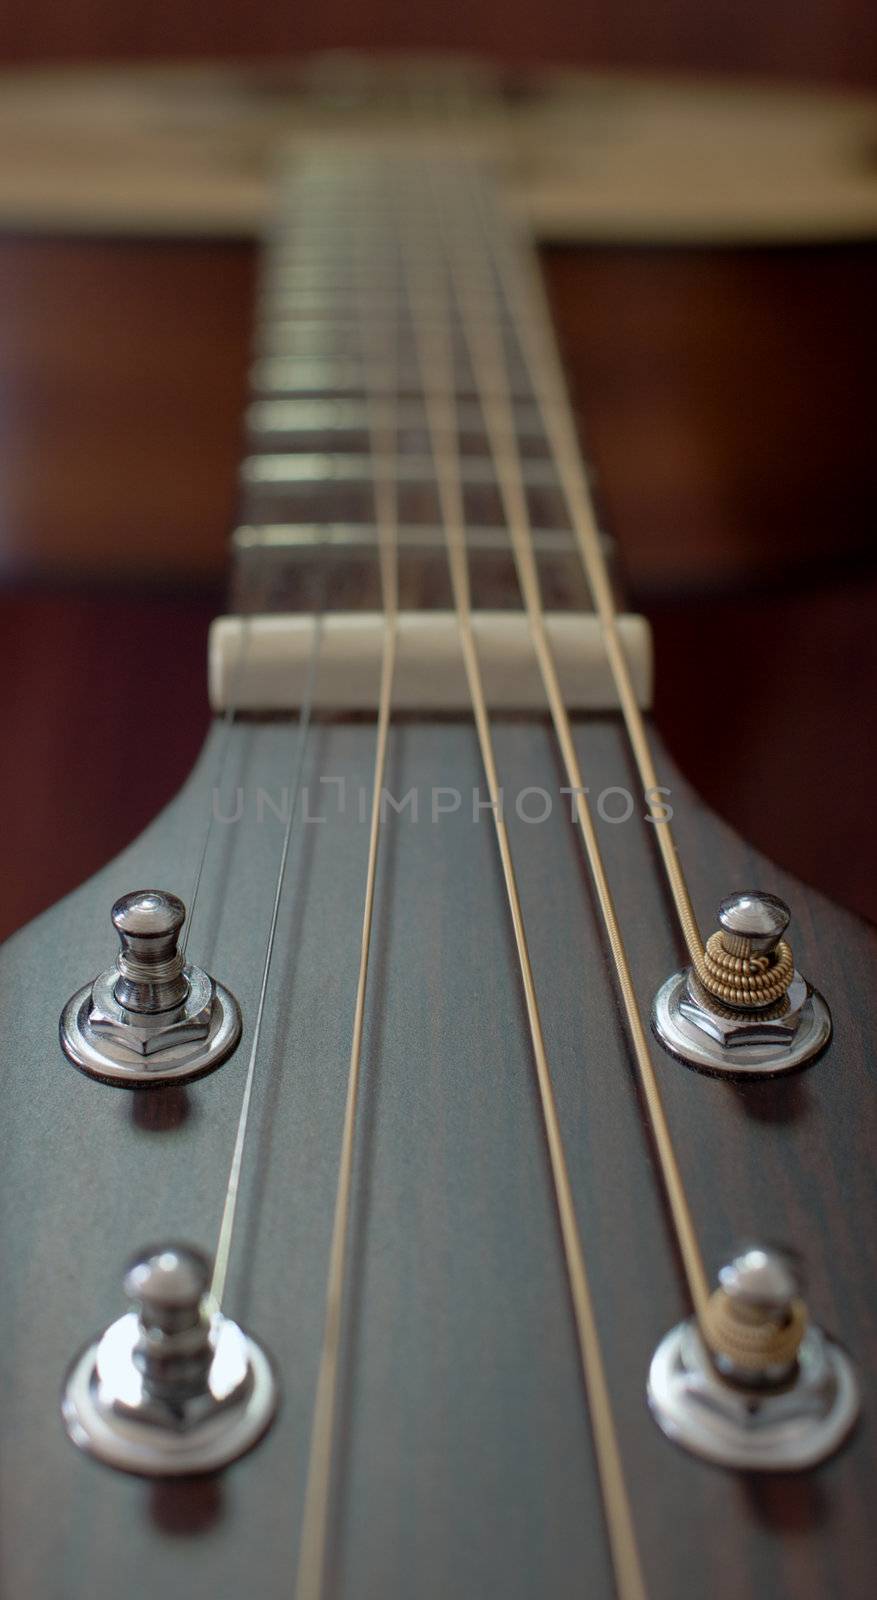 Guitar neck and strings looking from the head towards the body with soft focus